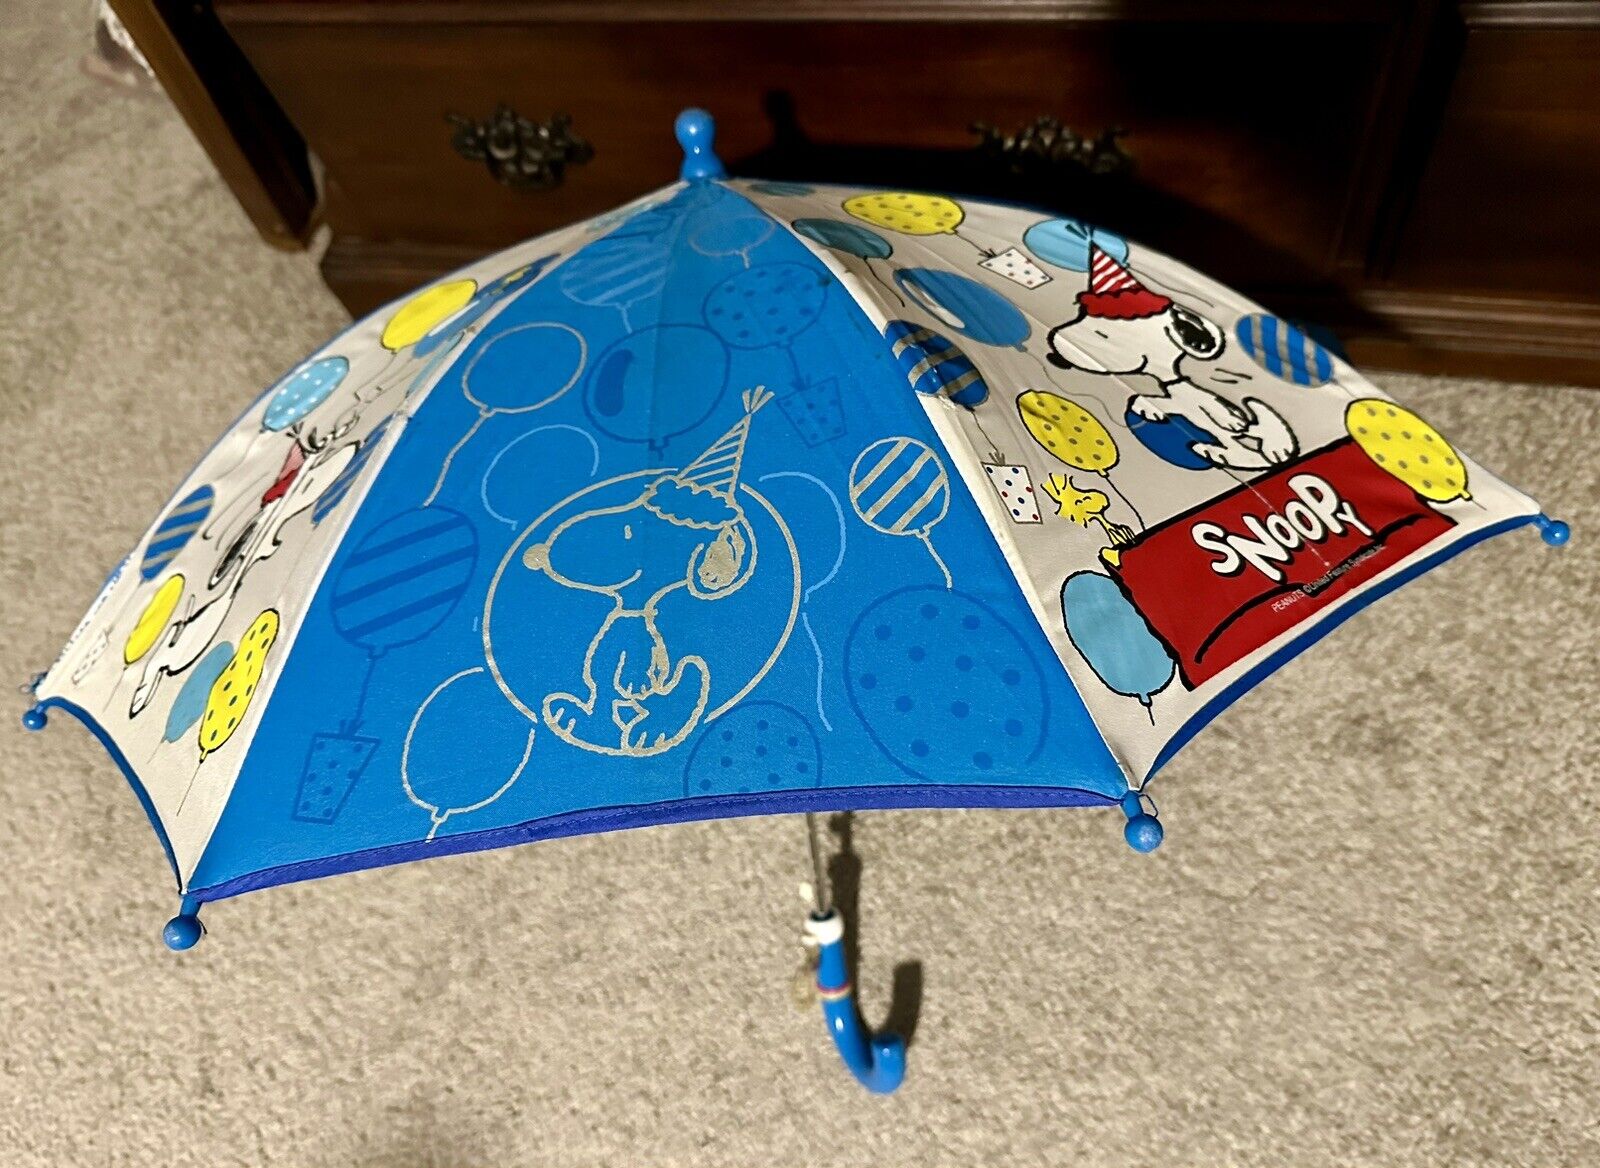 VTG RARE HARD TO FIND Snoopy Party kids Umbrella, United Feature Syndicate Inc.